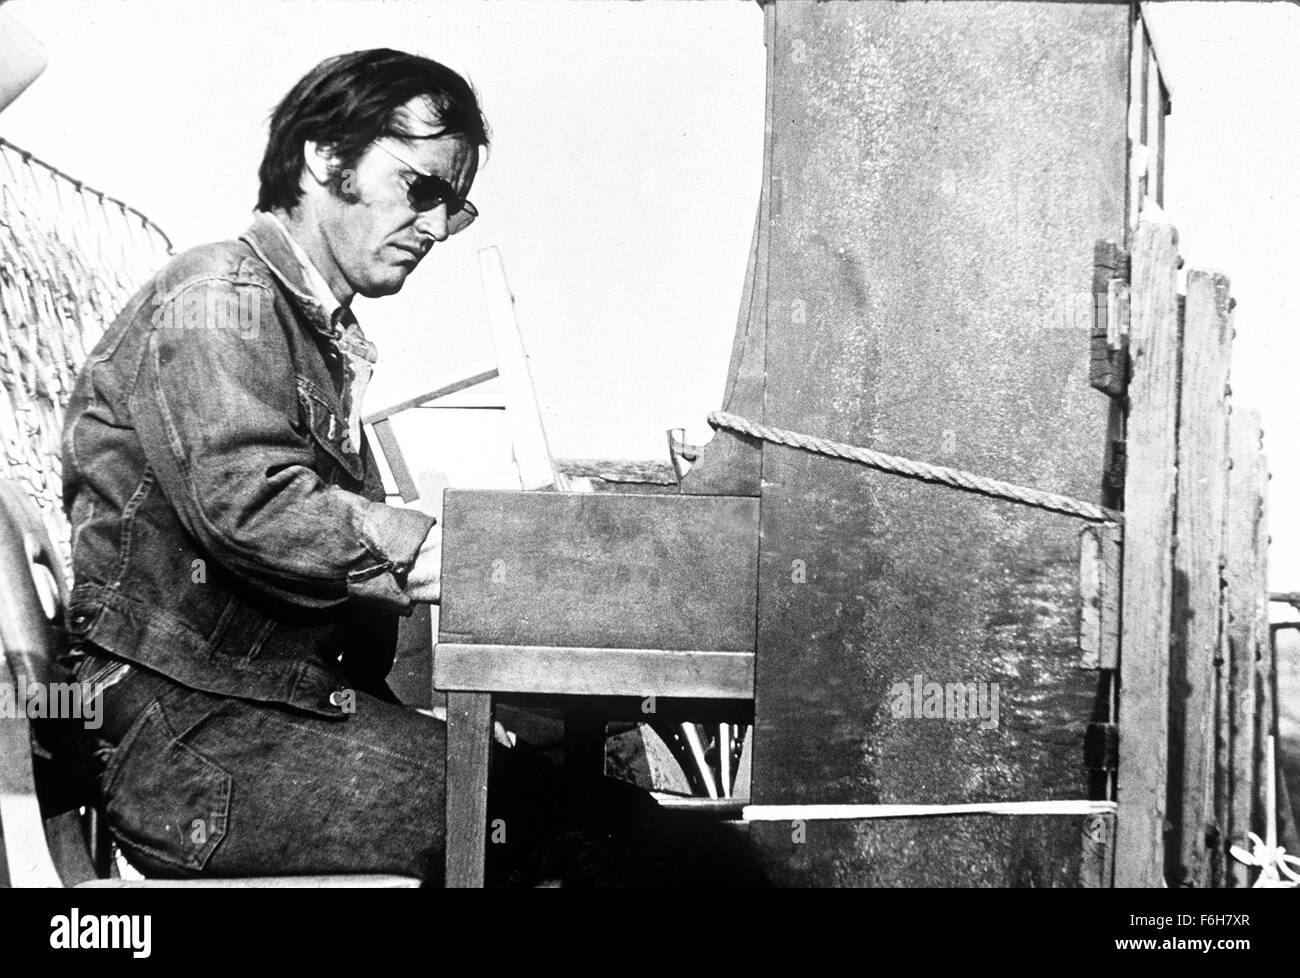 1970, Film Title: FIVE EASY PIECES, Director: BOB RAFELSON, Pictured:  ACCESSORIES, MUSICAL INSTRUMENT, JACK NICHOLSON, PIANO, SUNGLASSES,  MUSICIAN, TOUGH GUY, COOL. (Credit Image: SNAP Stock Photo - Alamy